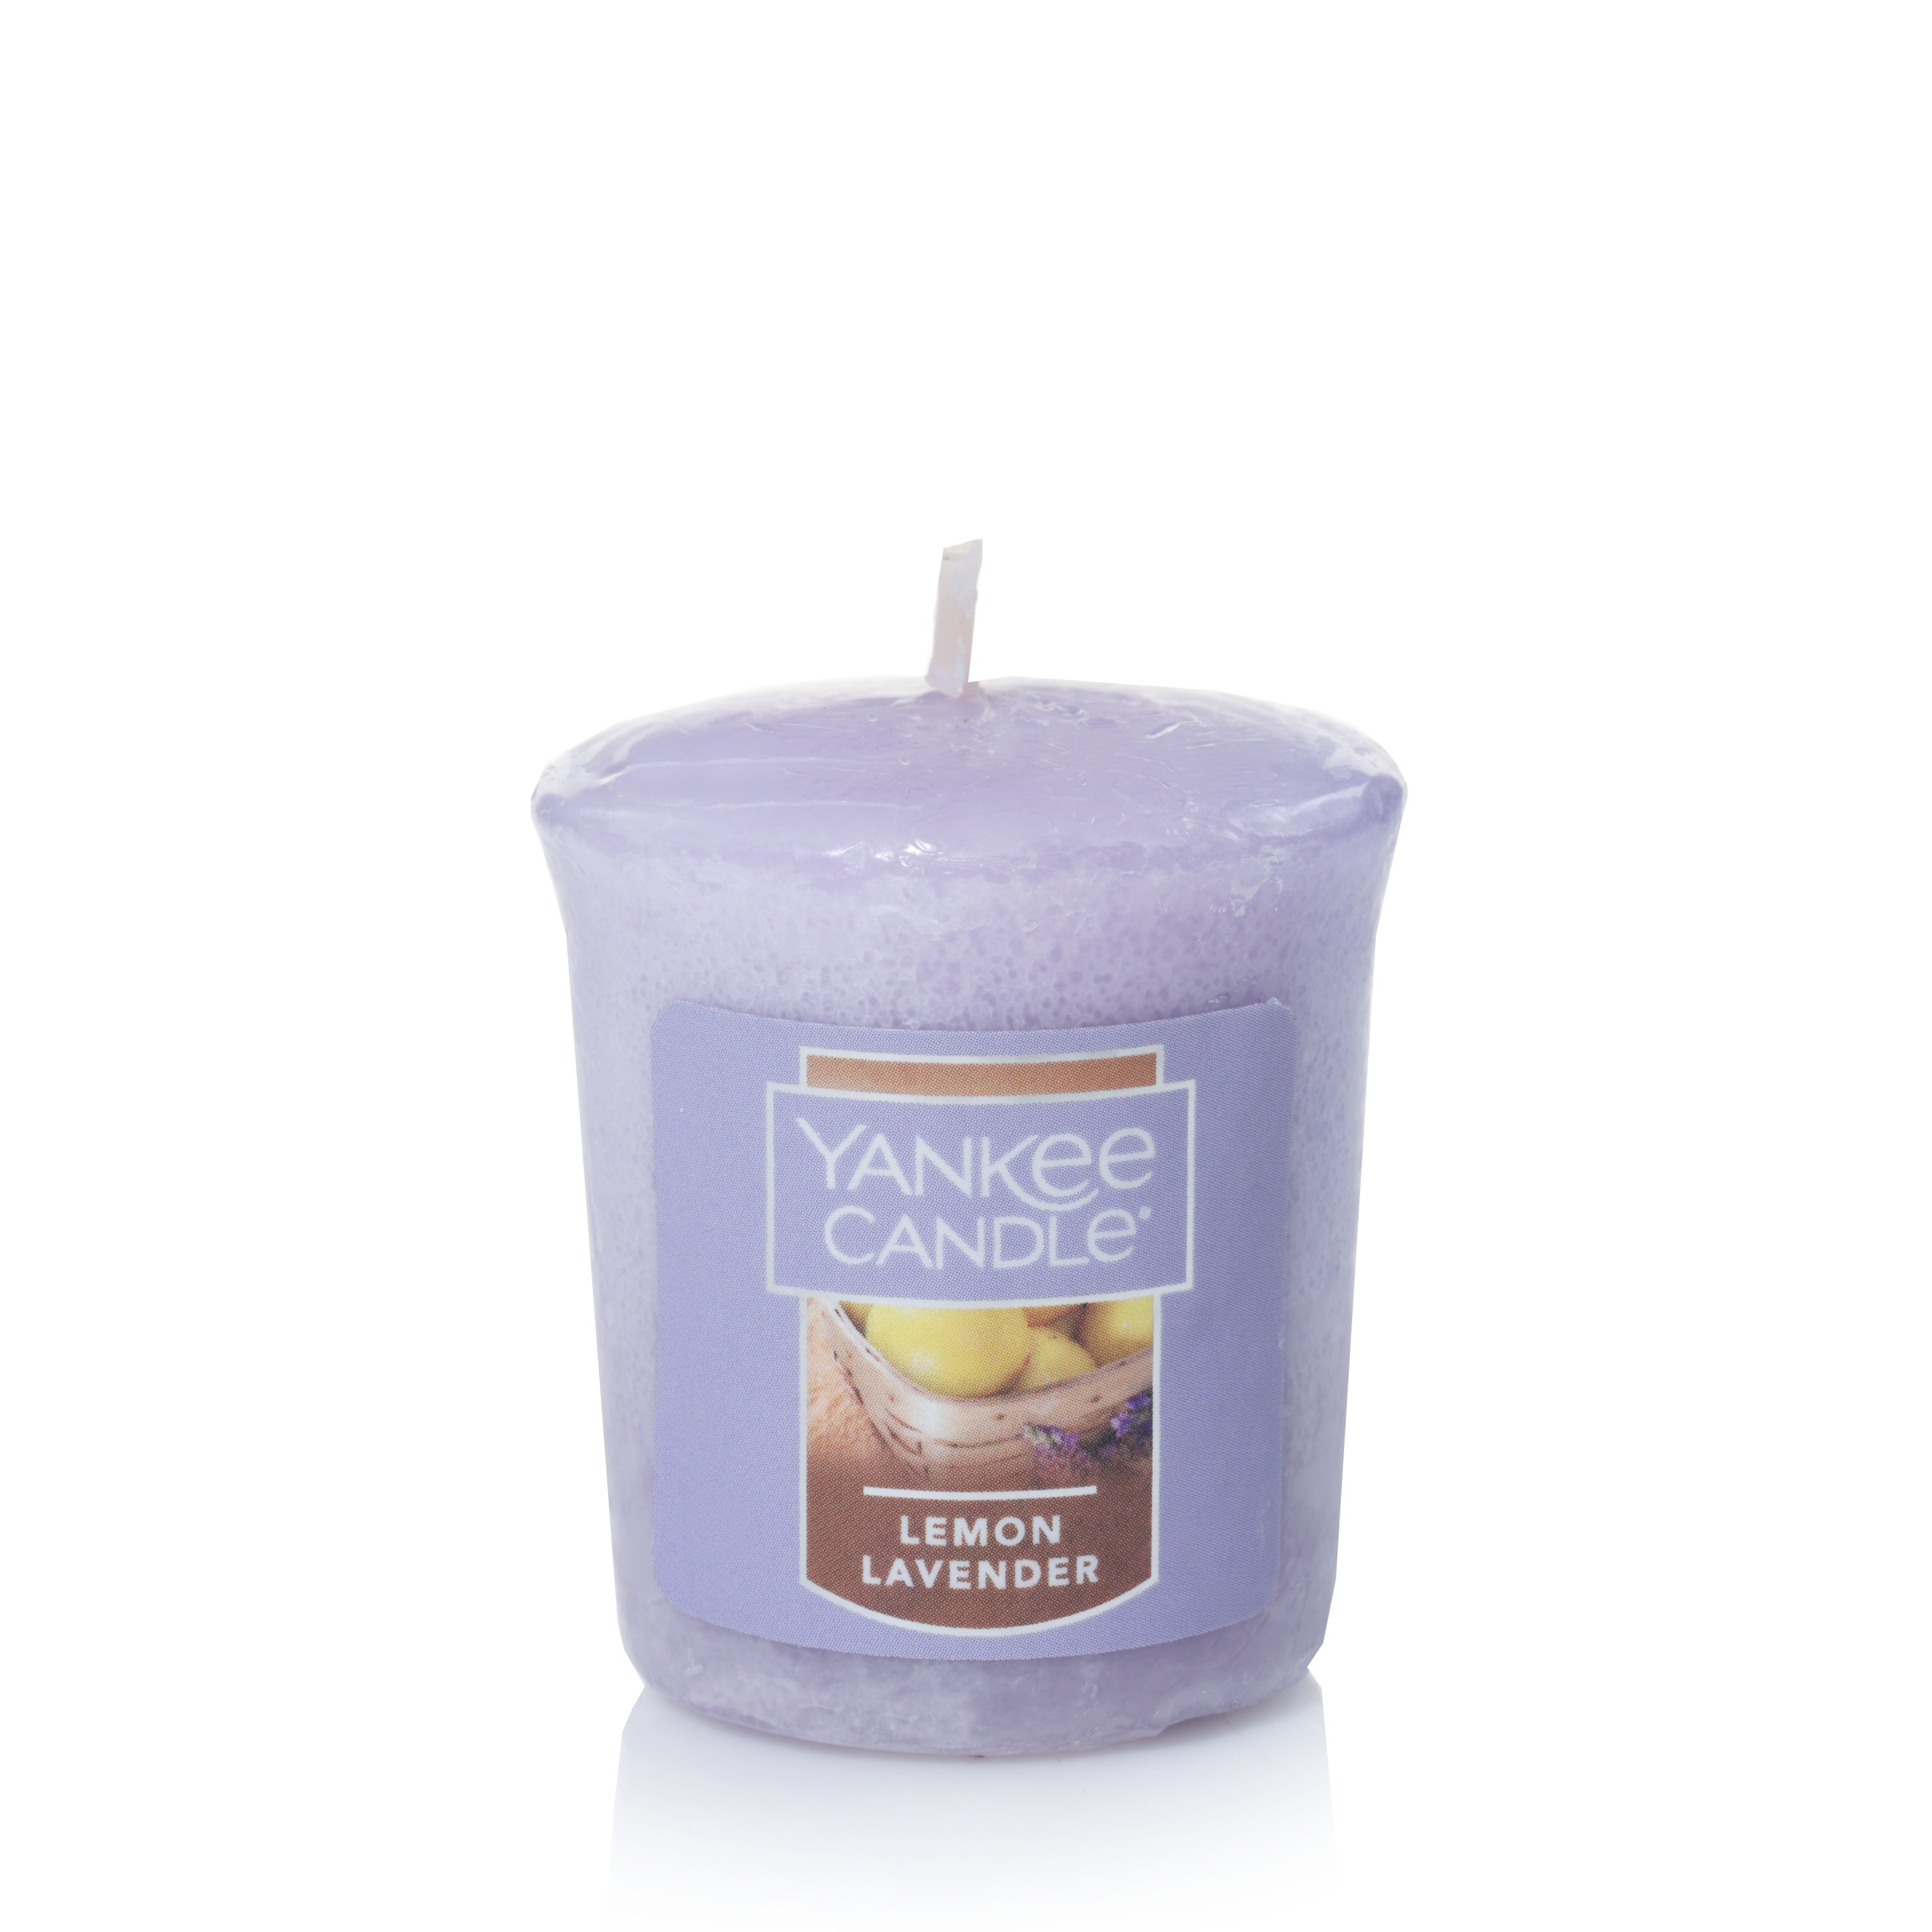 Yankee Candle USA Exclusive Jellybeans Sampler